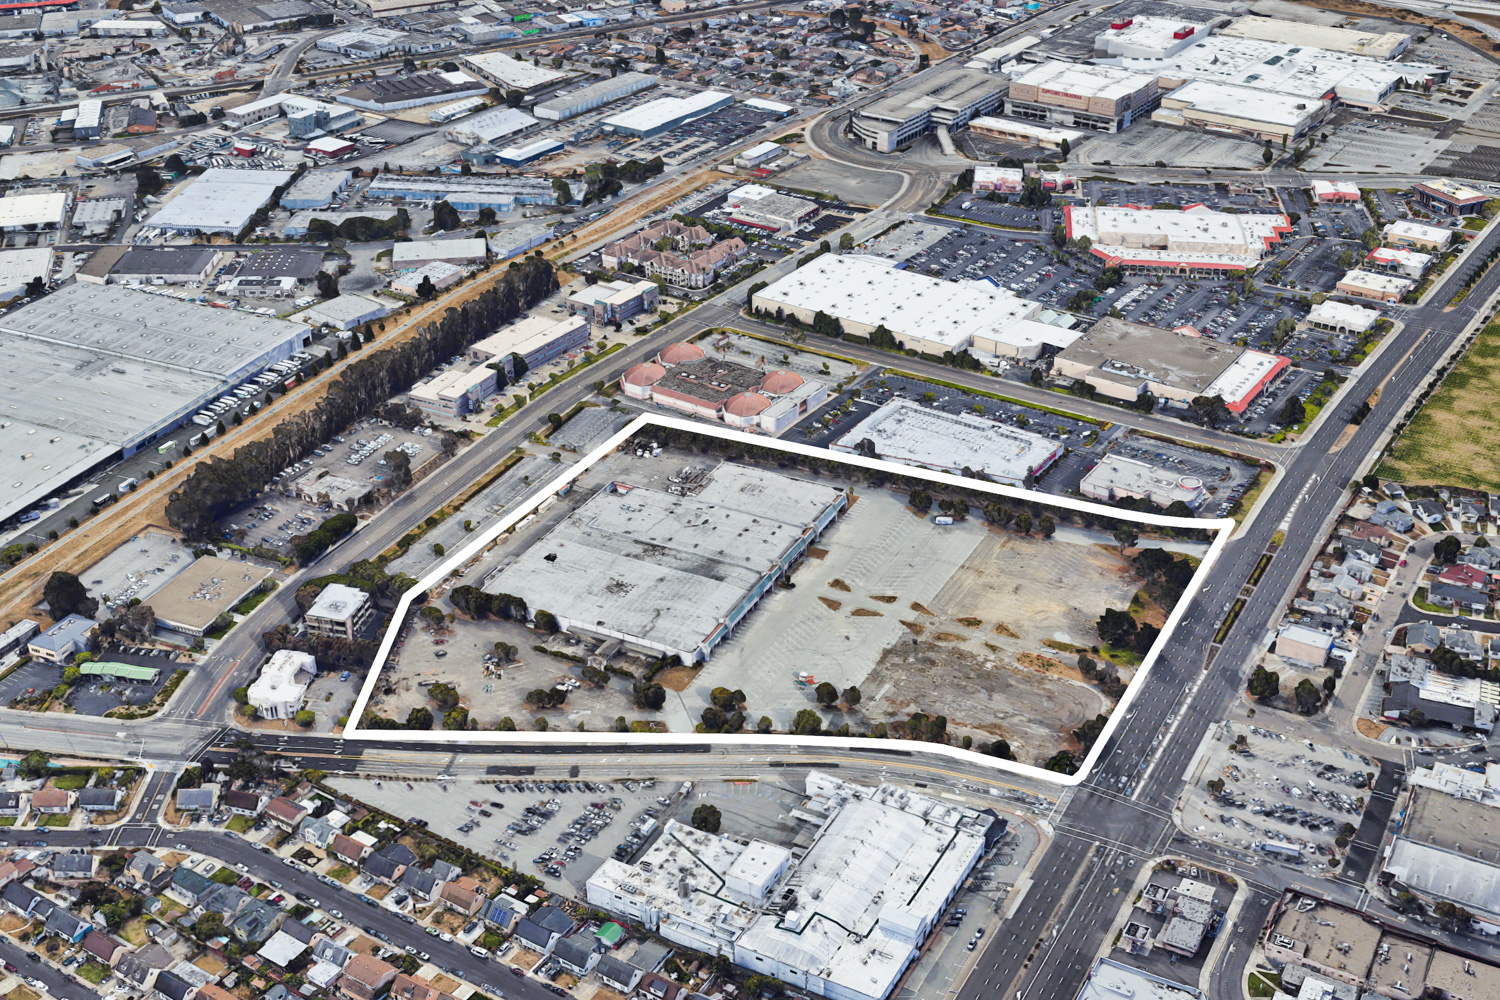 180 El Camino Real 14.5-acre site map outlined roughly by YIMBY, image via Google Satellite